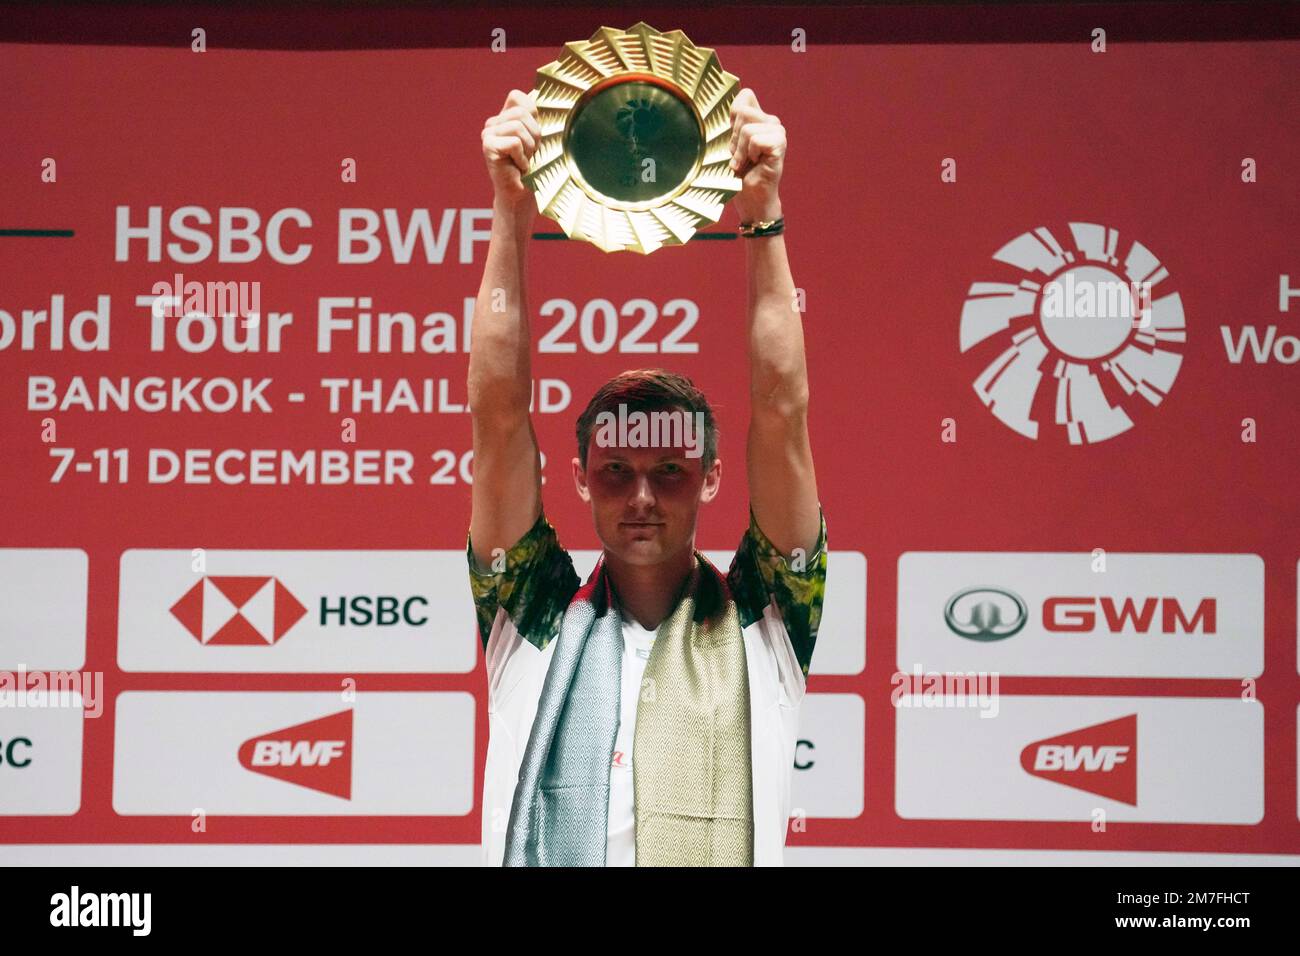 Denmarks Viktor Axelsen celebrates with his trophy after defeating Indonesias Anthony Sinisuka Ginting during their mens singles final badminton match at the BWF World Tour Finals in Bangkok, Thailand, Sunday, Dec